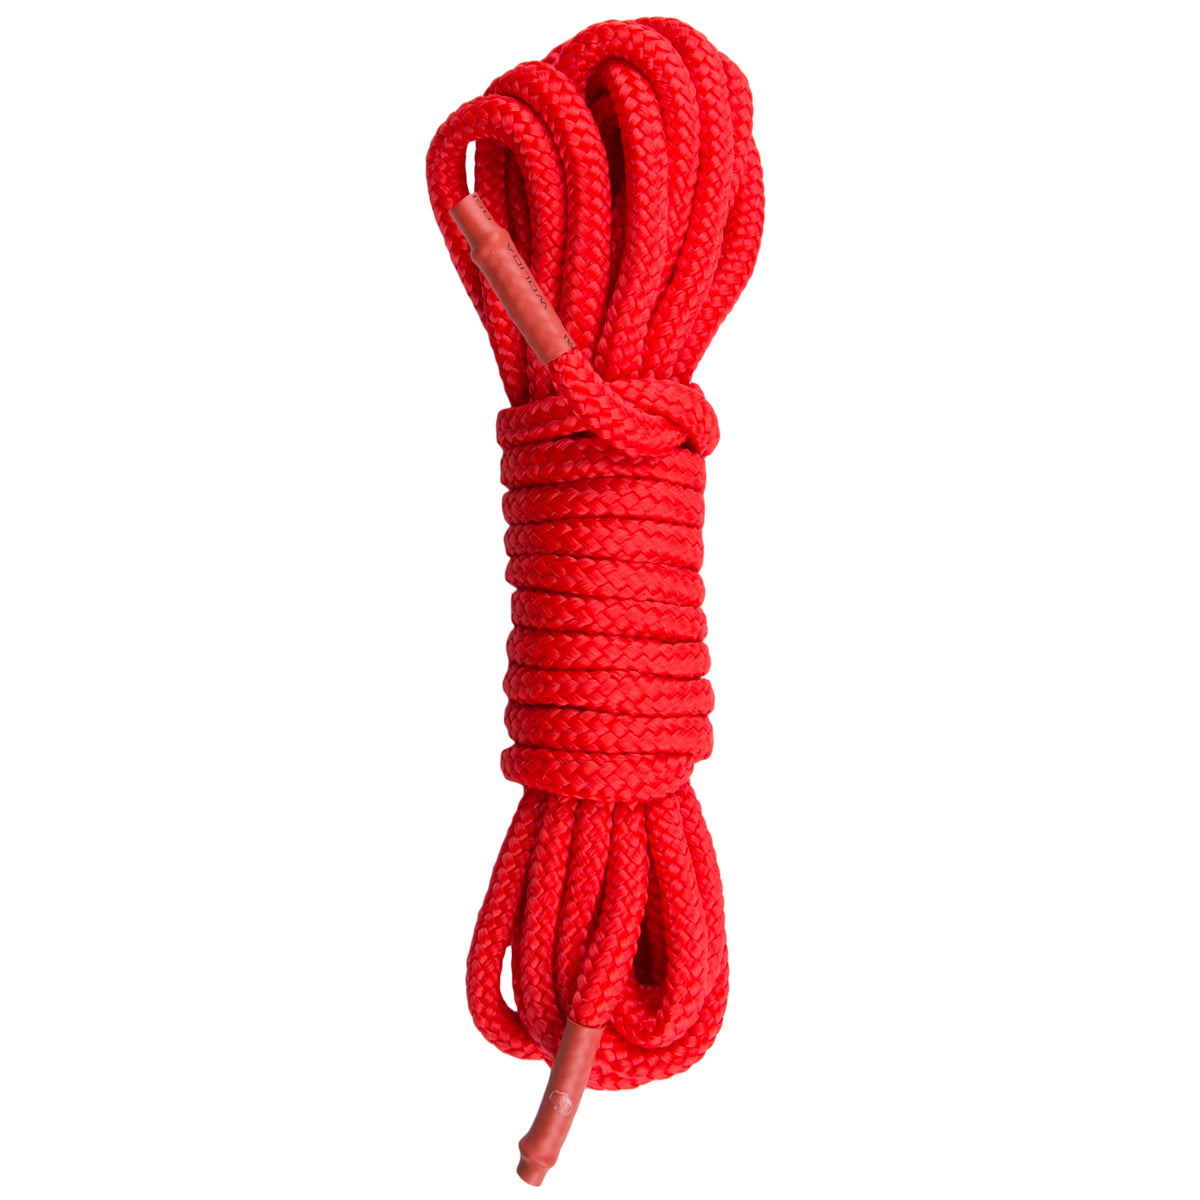 Bondage Rope 10m Red - Just for you desires